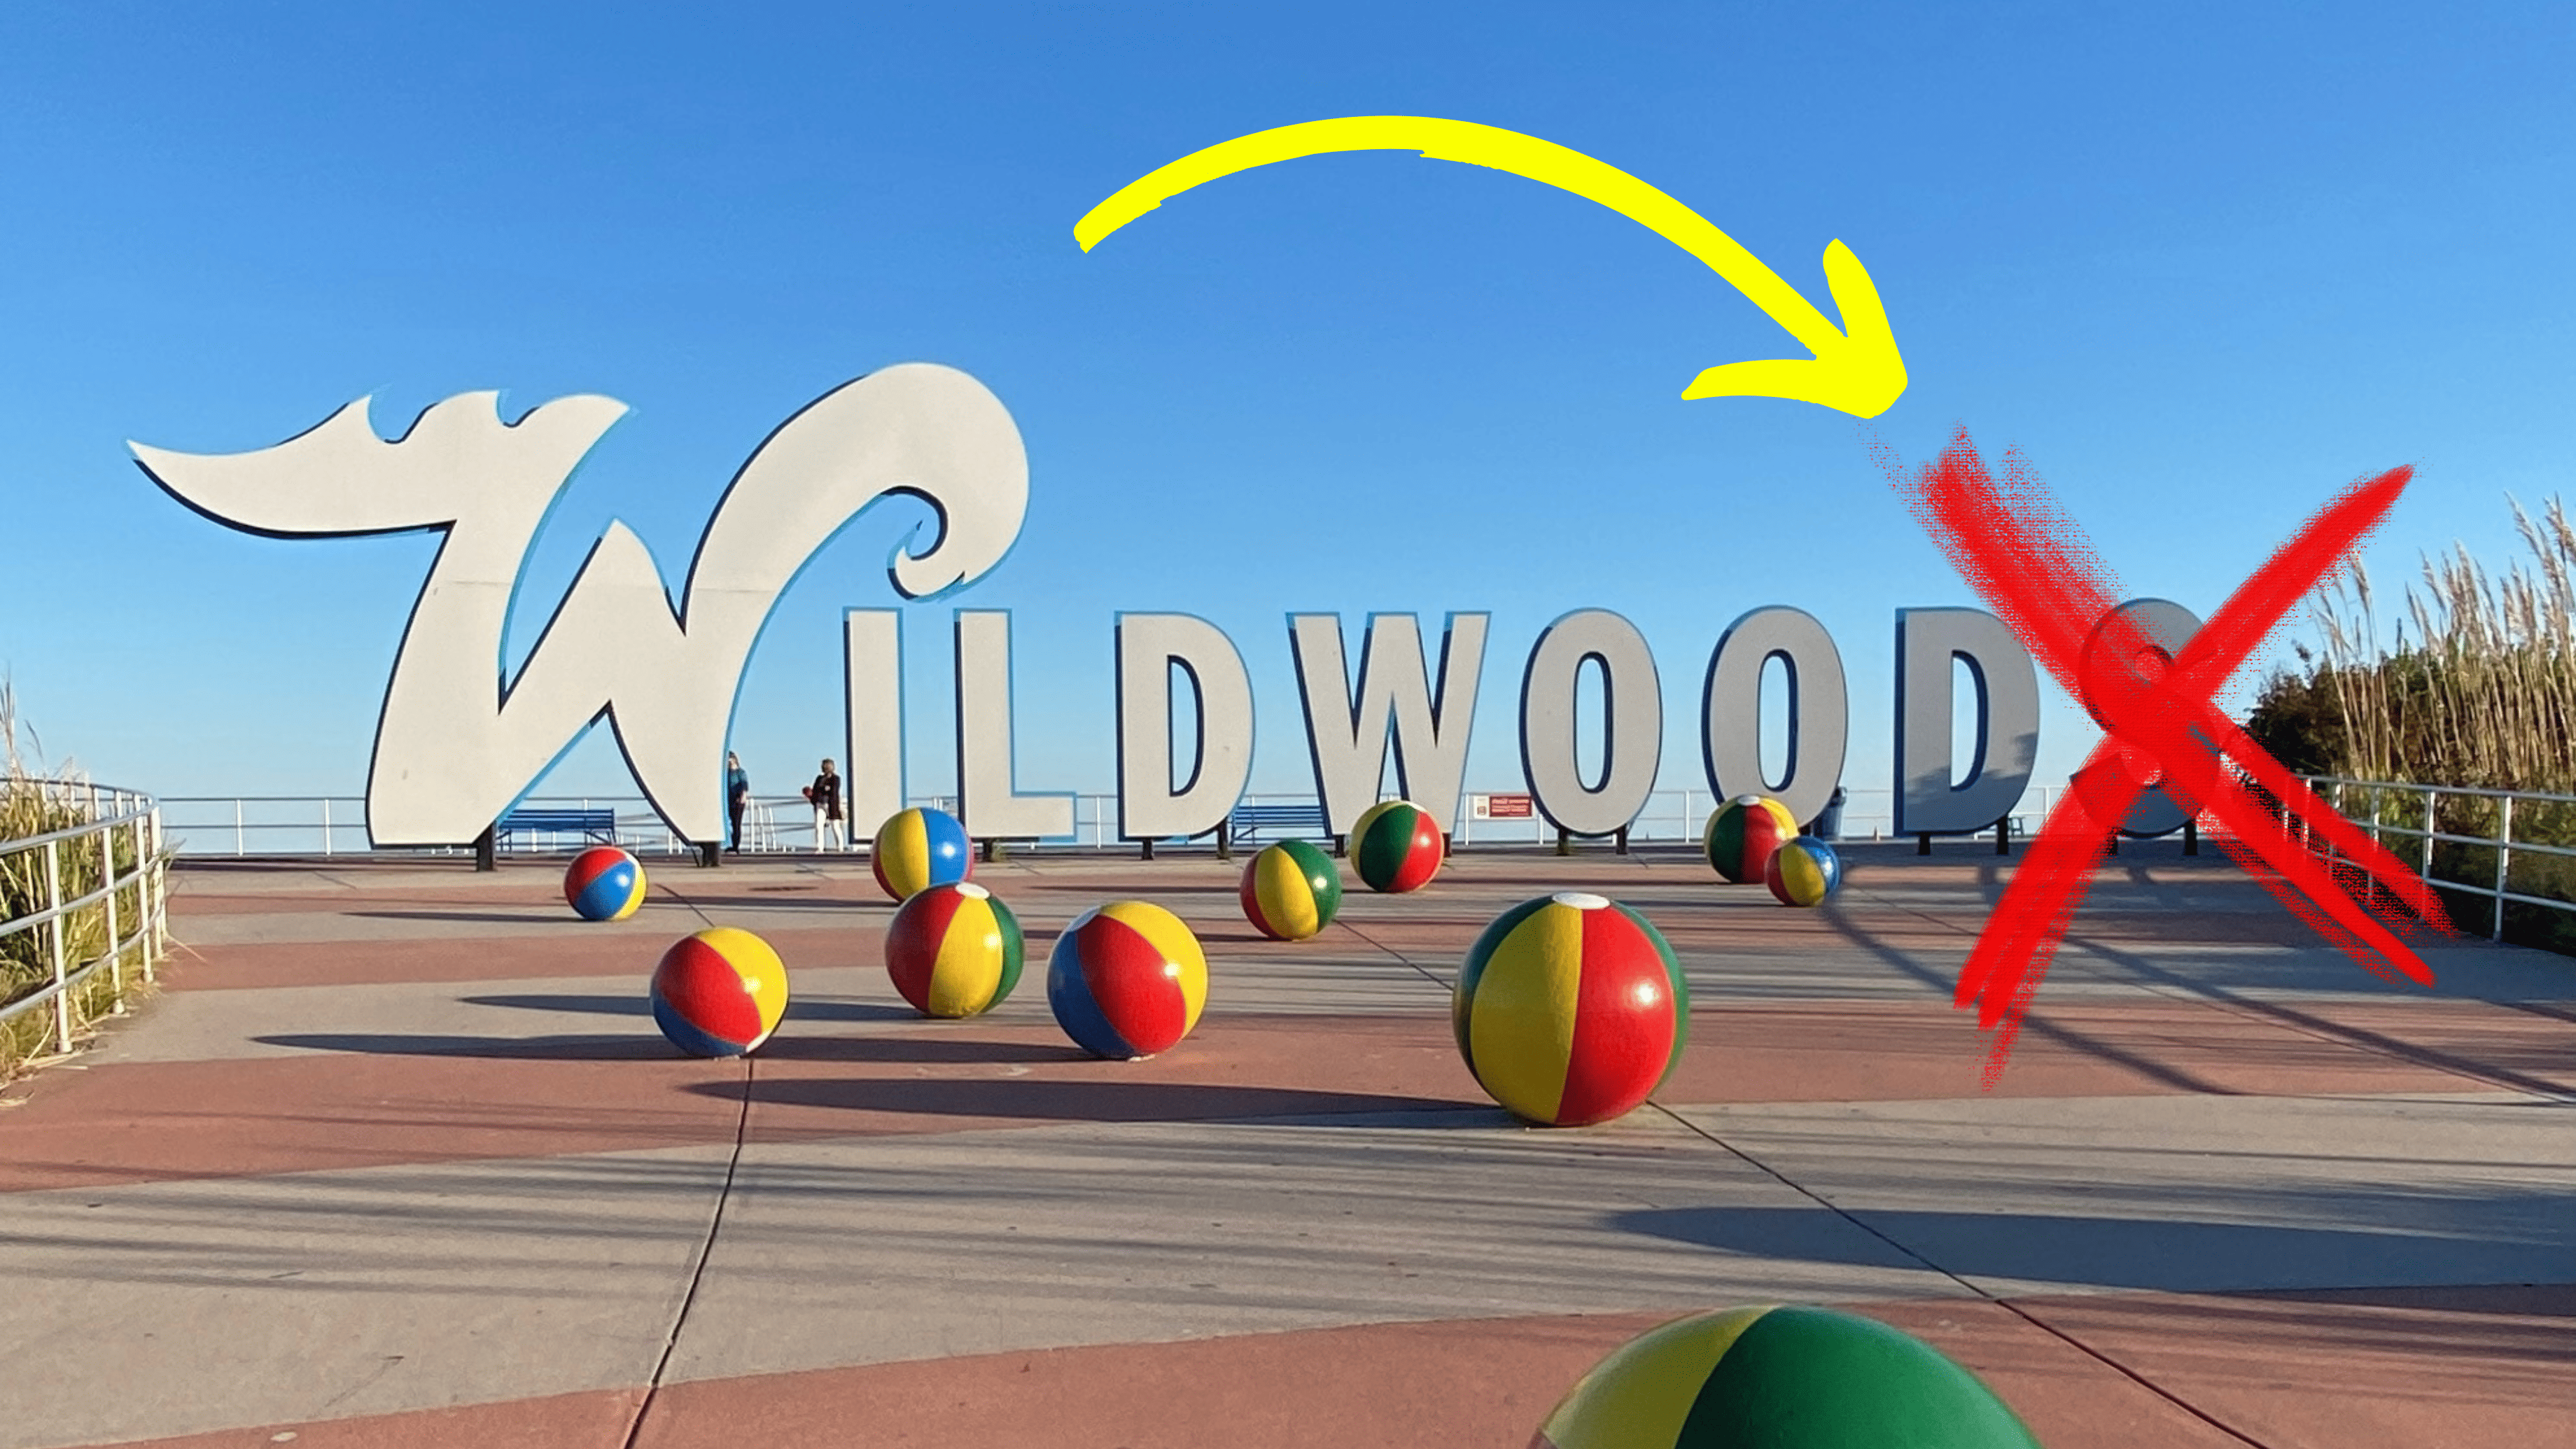 Famous Wildwoods Sign To Drop “S” Letter